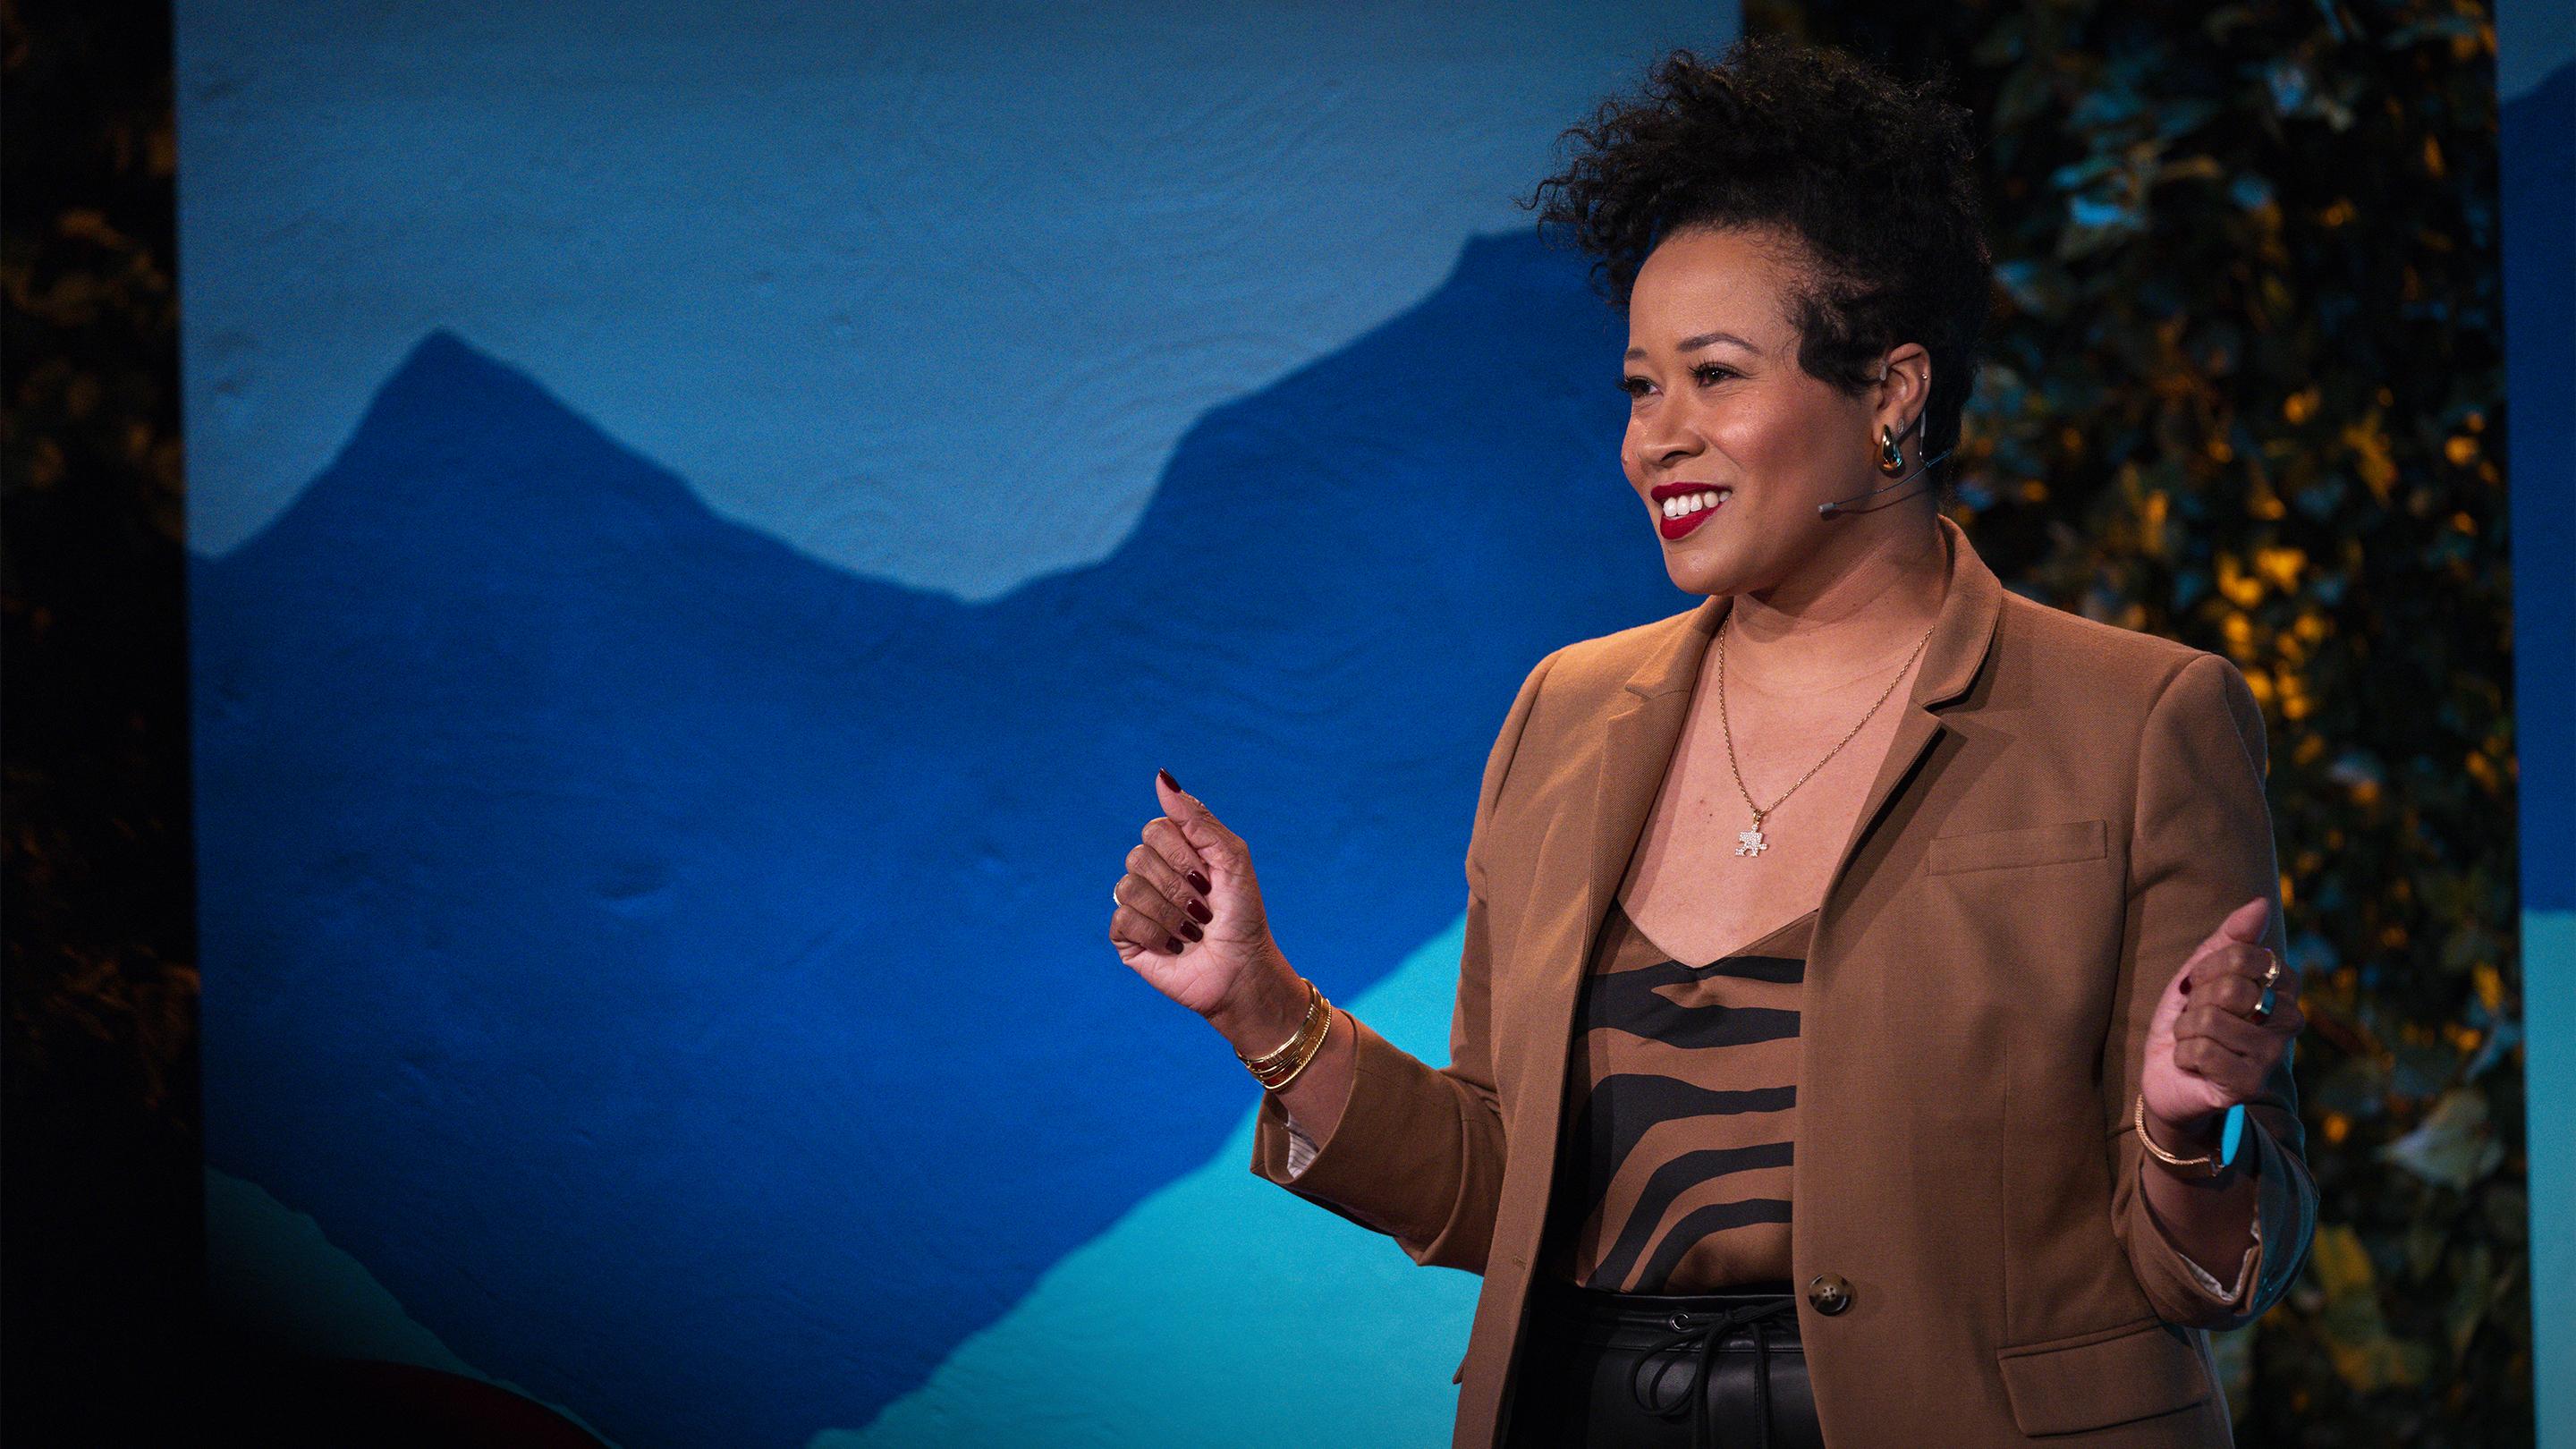 3 steps to better connect with your fellow humans | Amber Cabral